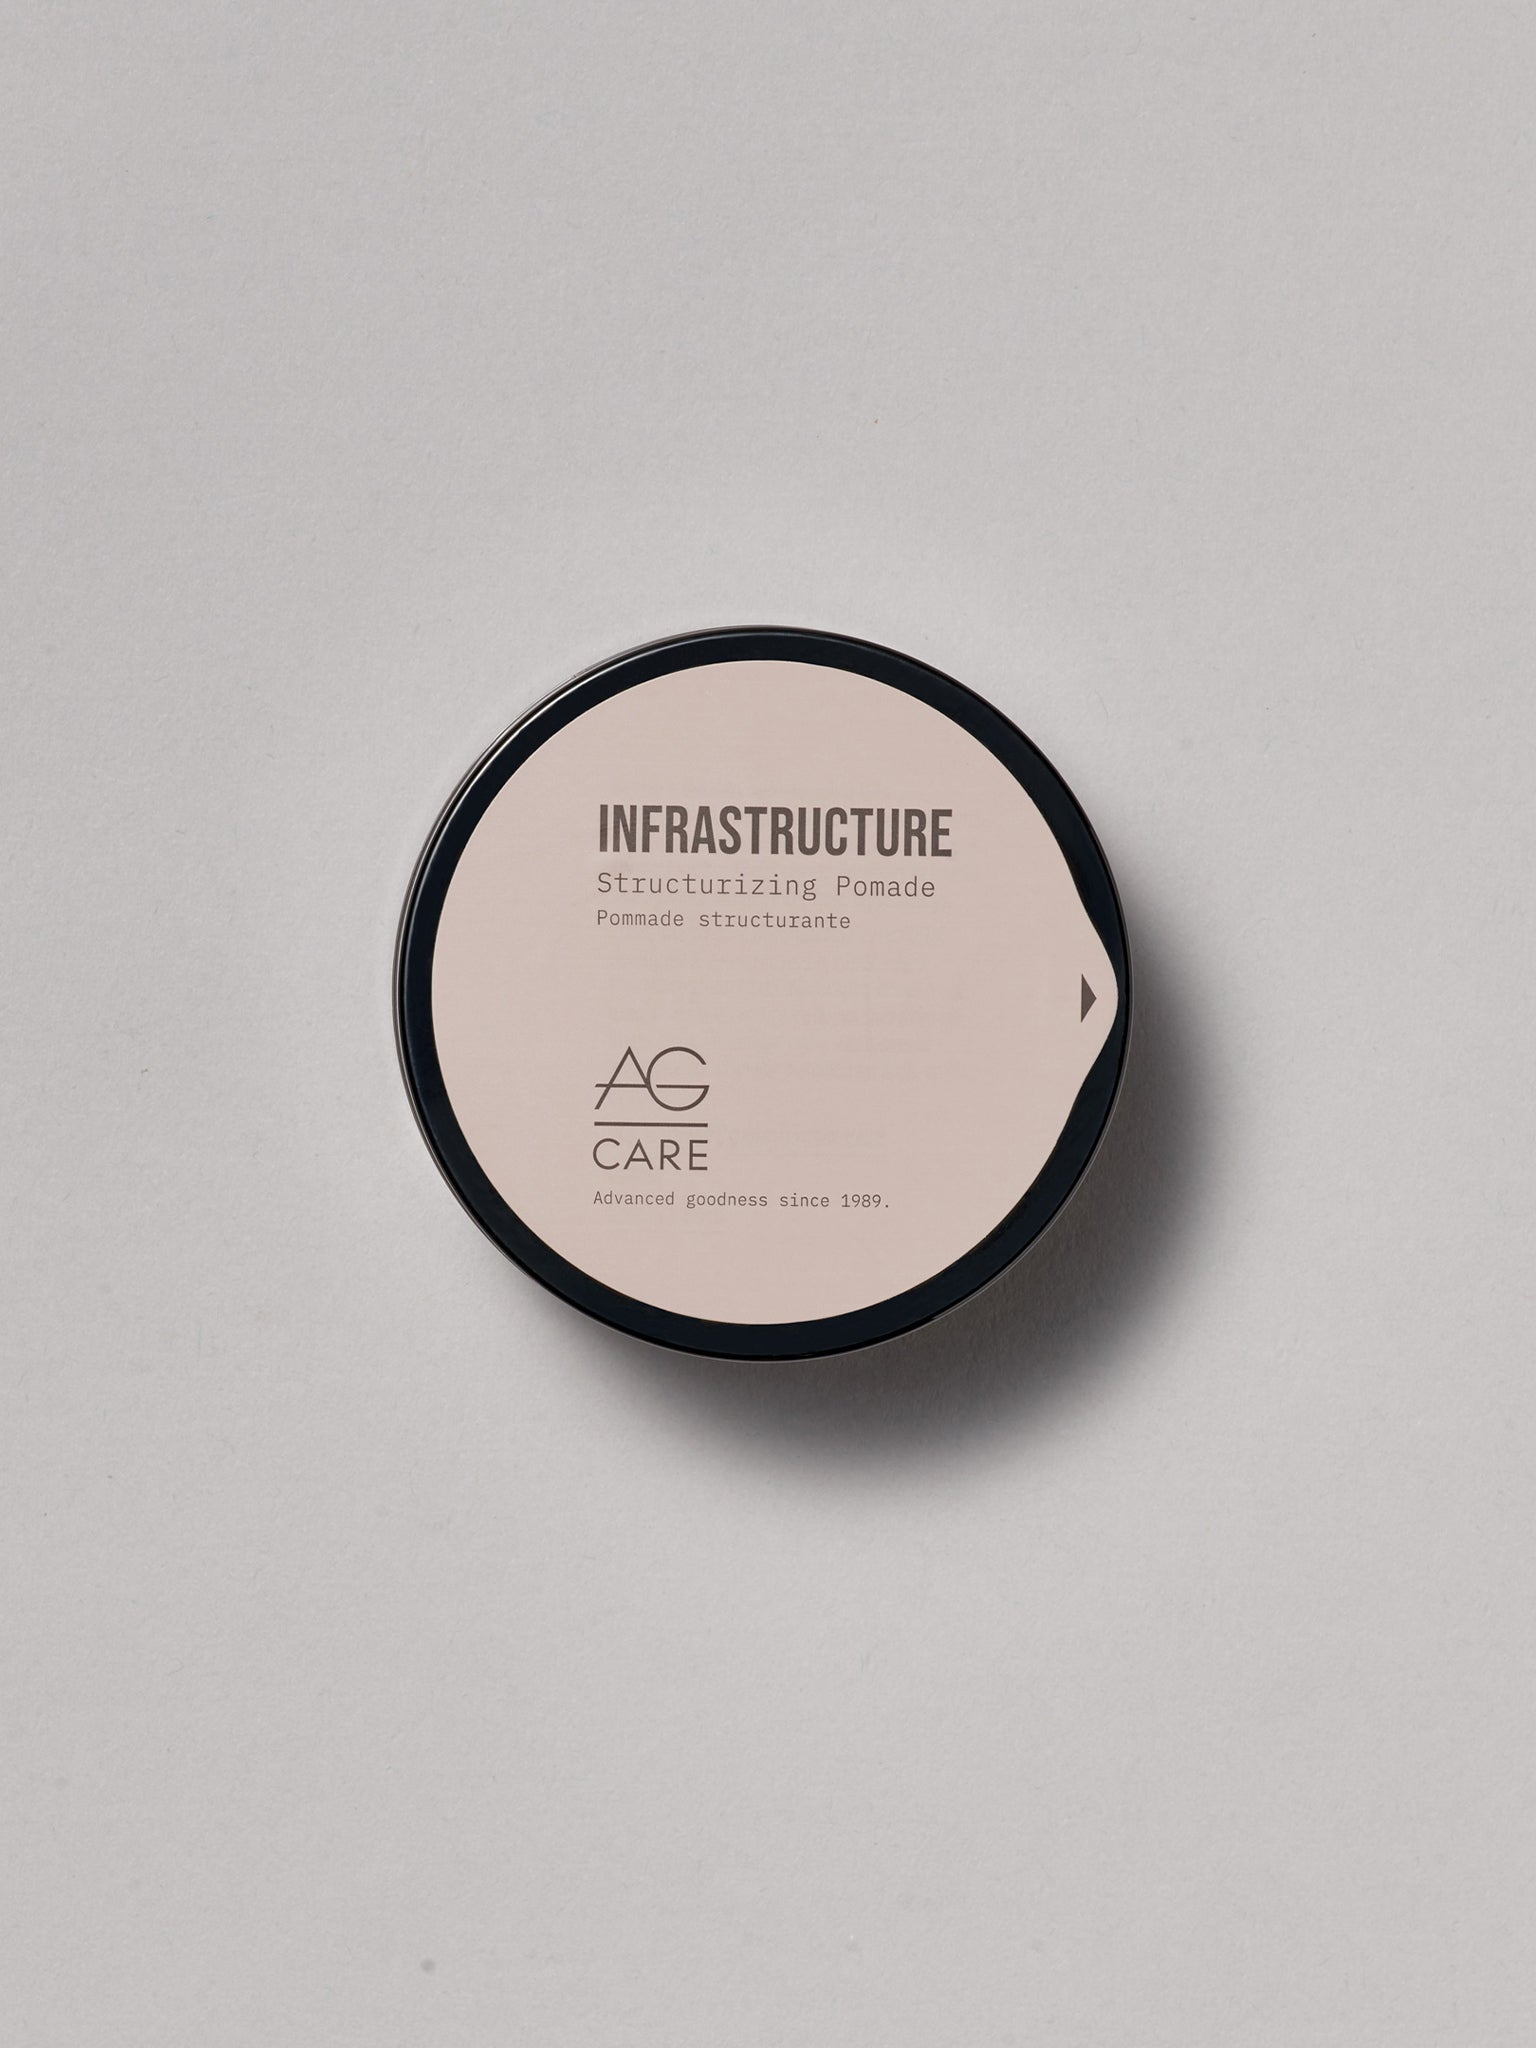 AG Hair - INFRASTRUCTURE Structurizing Pomade - ProCare Outlet by AG Hair